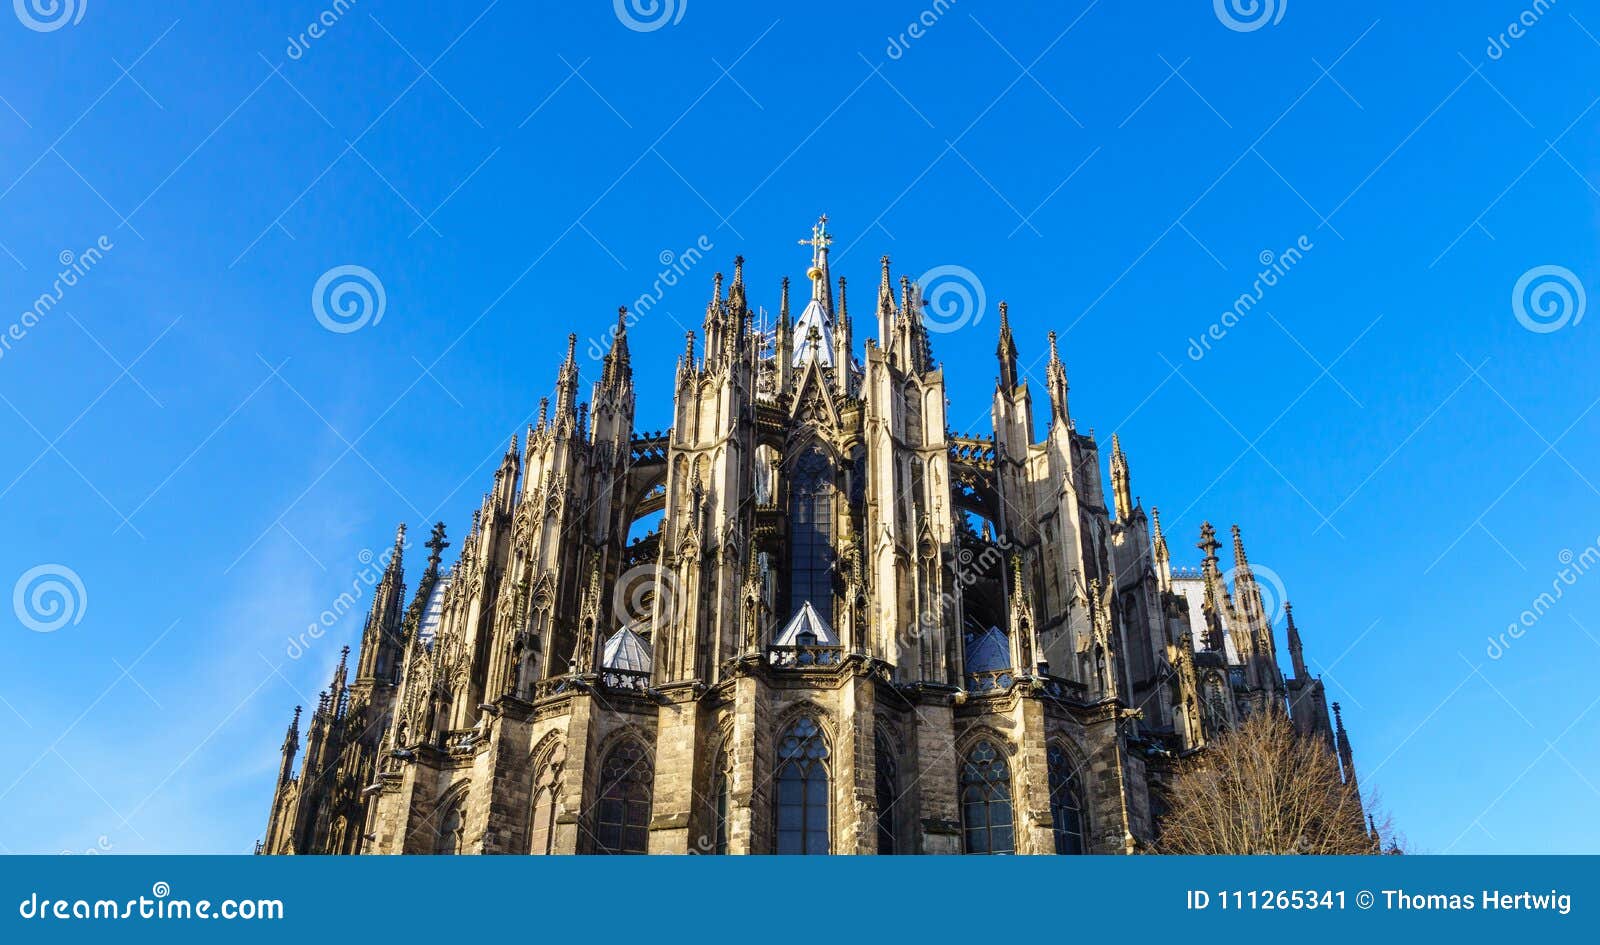 cologne cathedral, monument of german catholicism and gothic architecture in cologne, germany